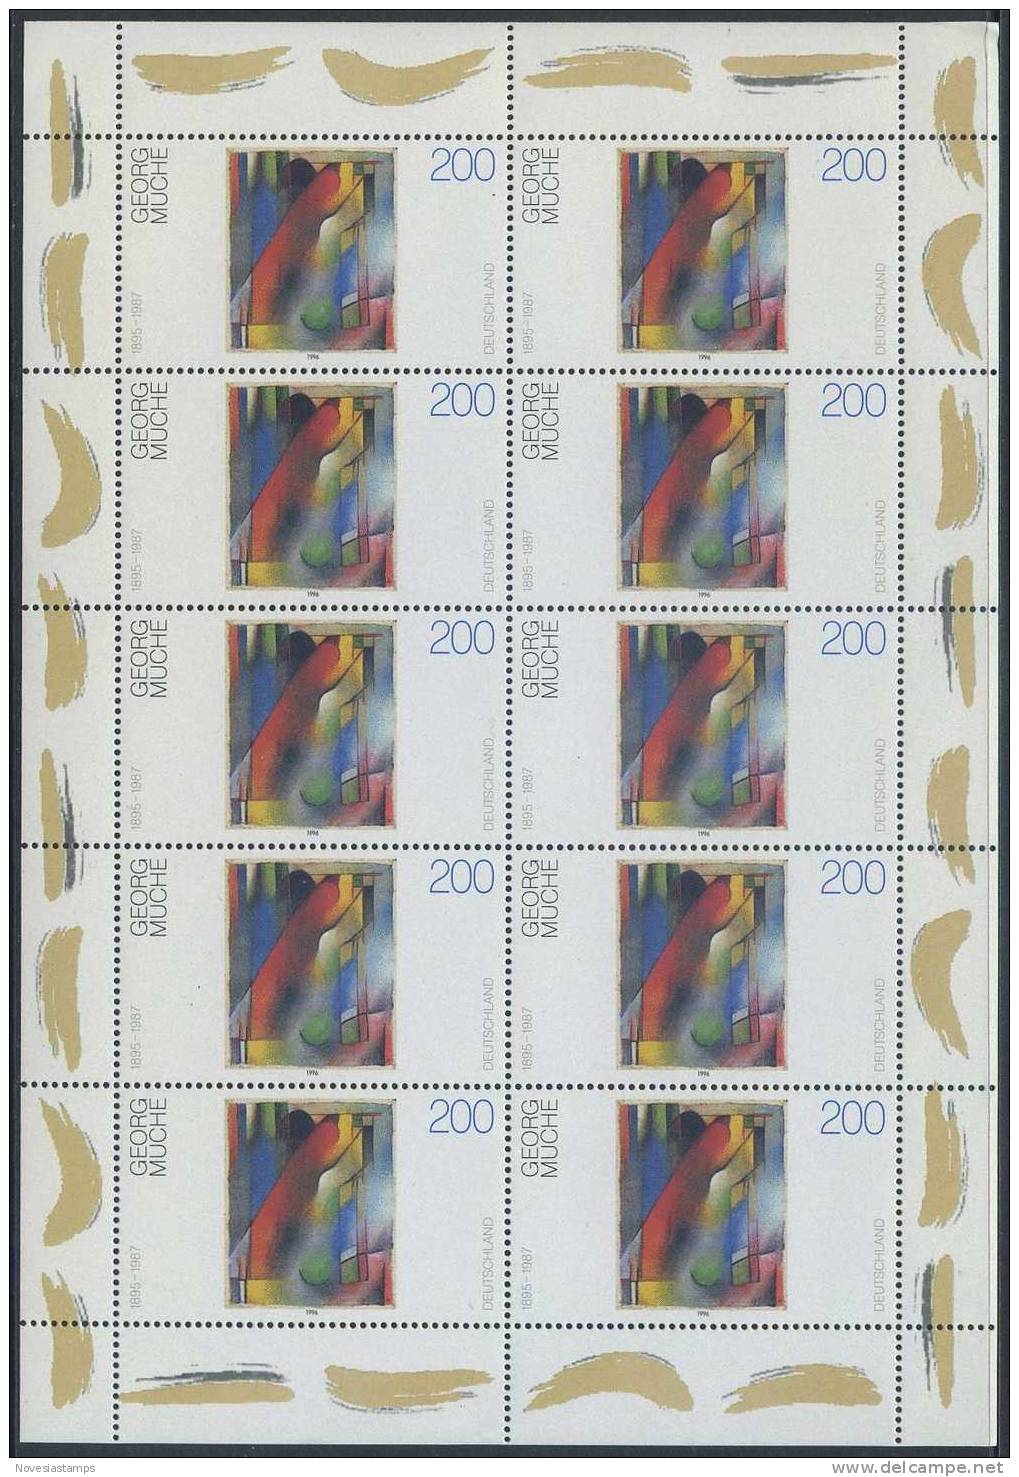 !a! GERMANY 1996 Mi. 1844 MNH SHEET(10) -Pictures From Germany: Havel-valley - 1991-2000